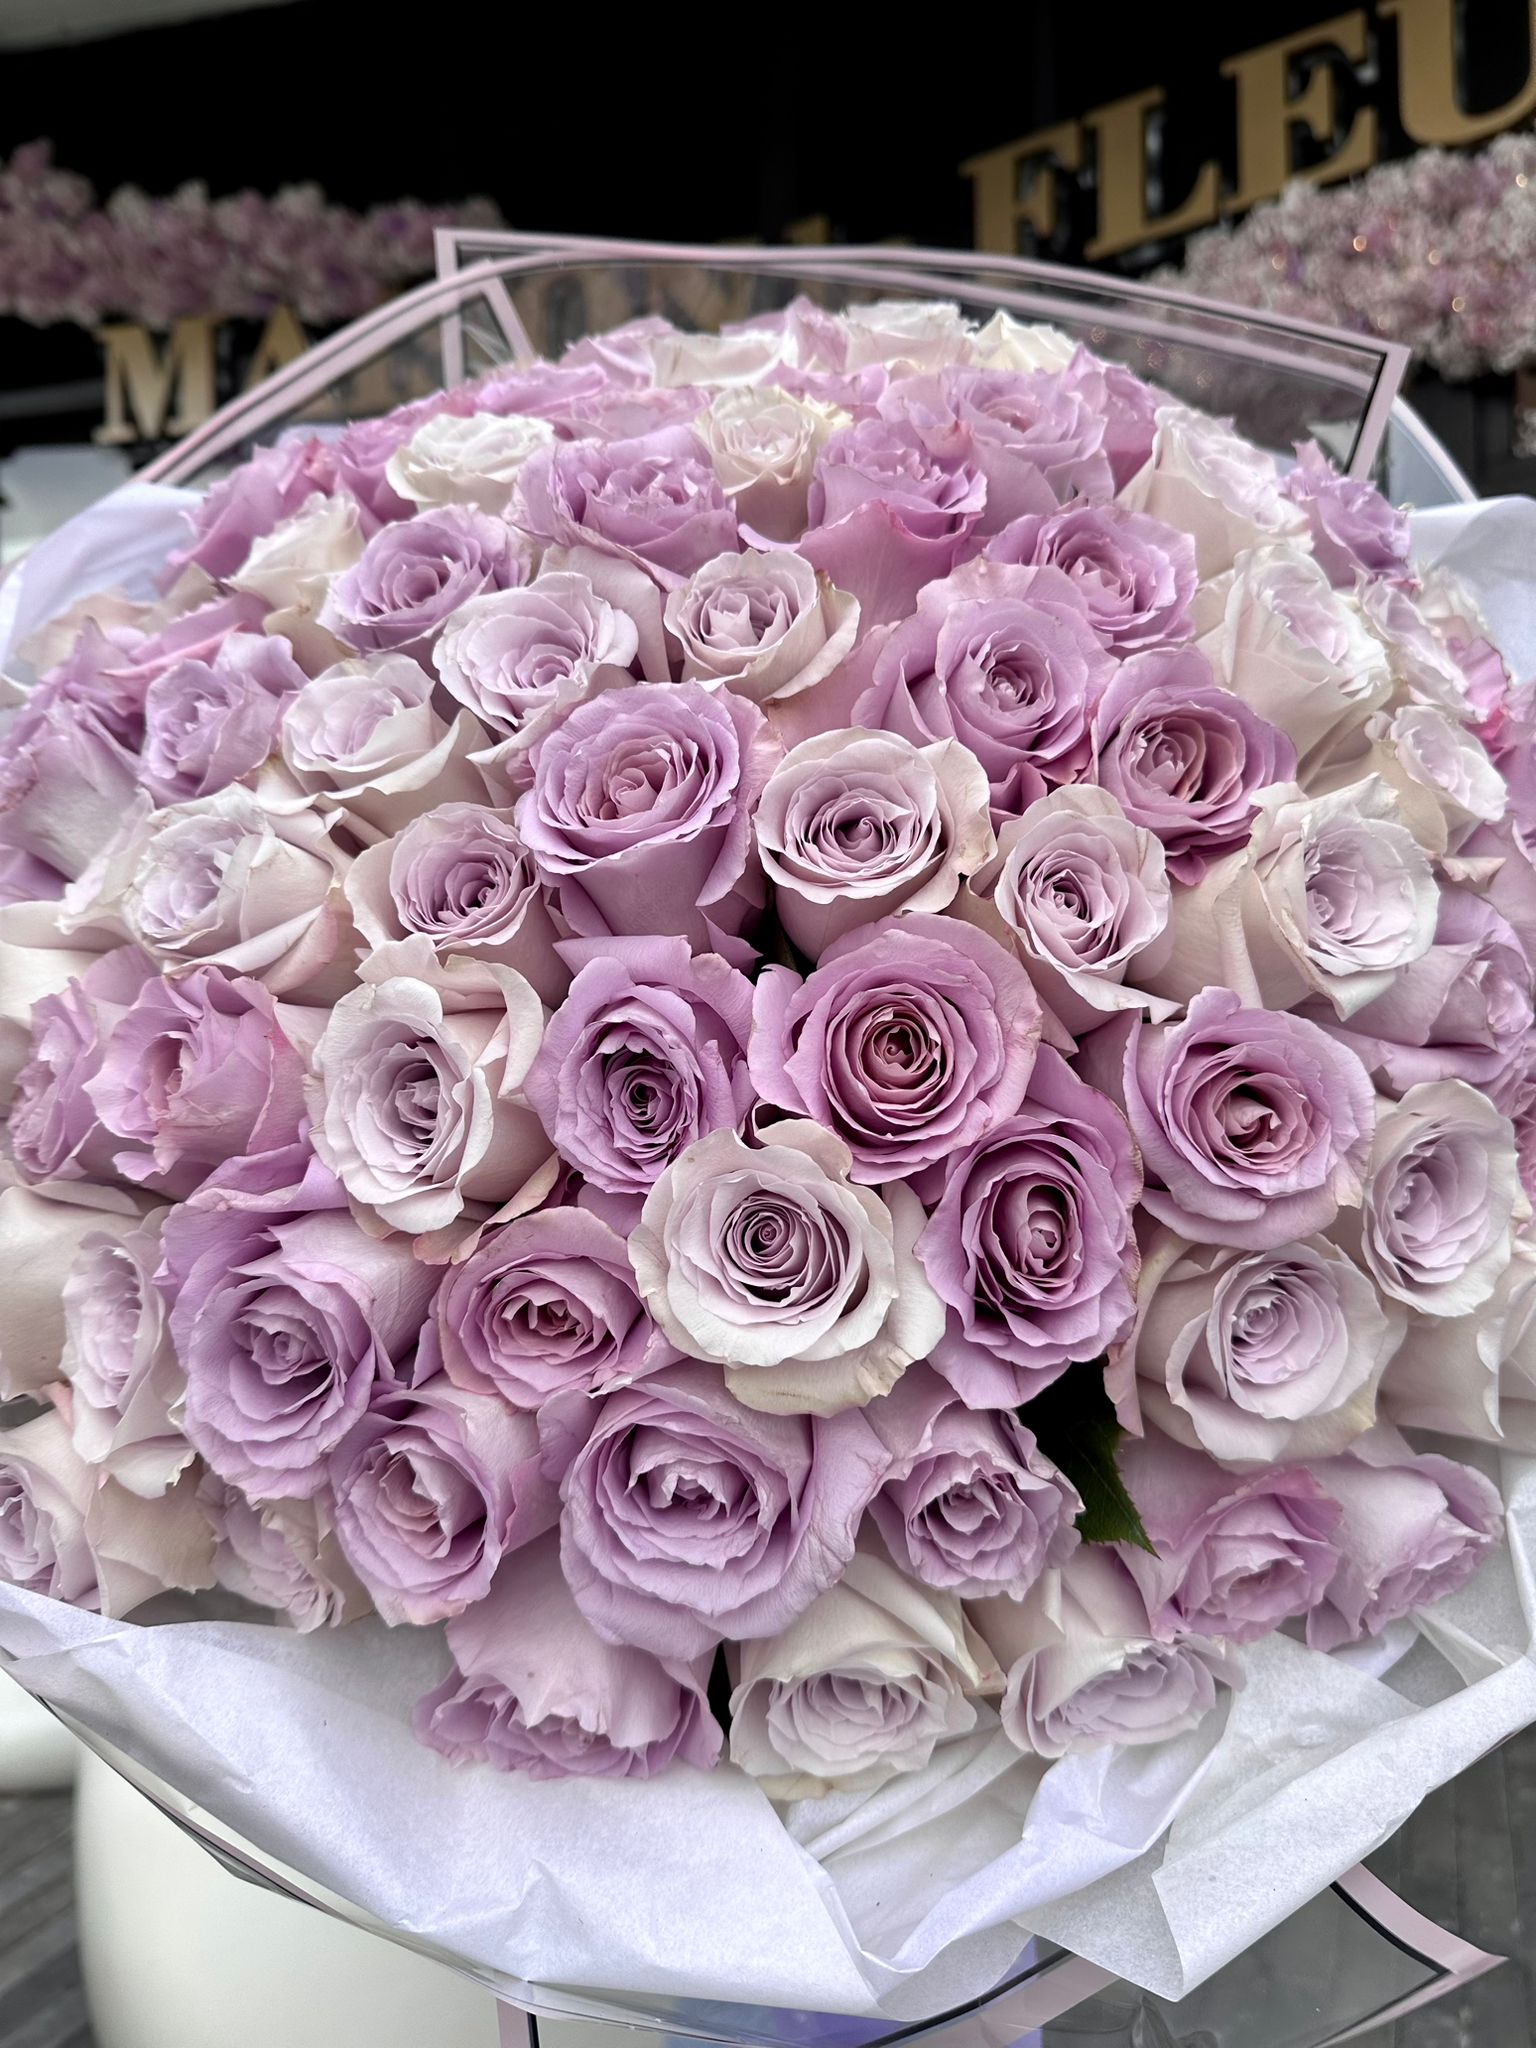 Do you LILAC it? 100 roses - lilac roses